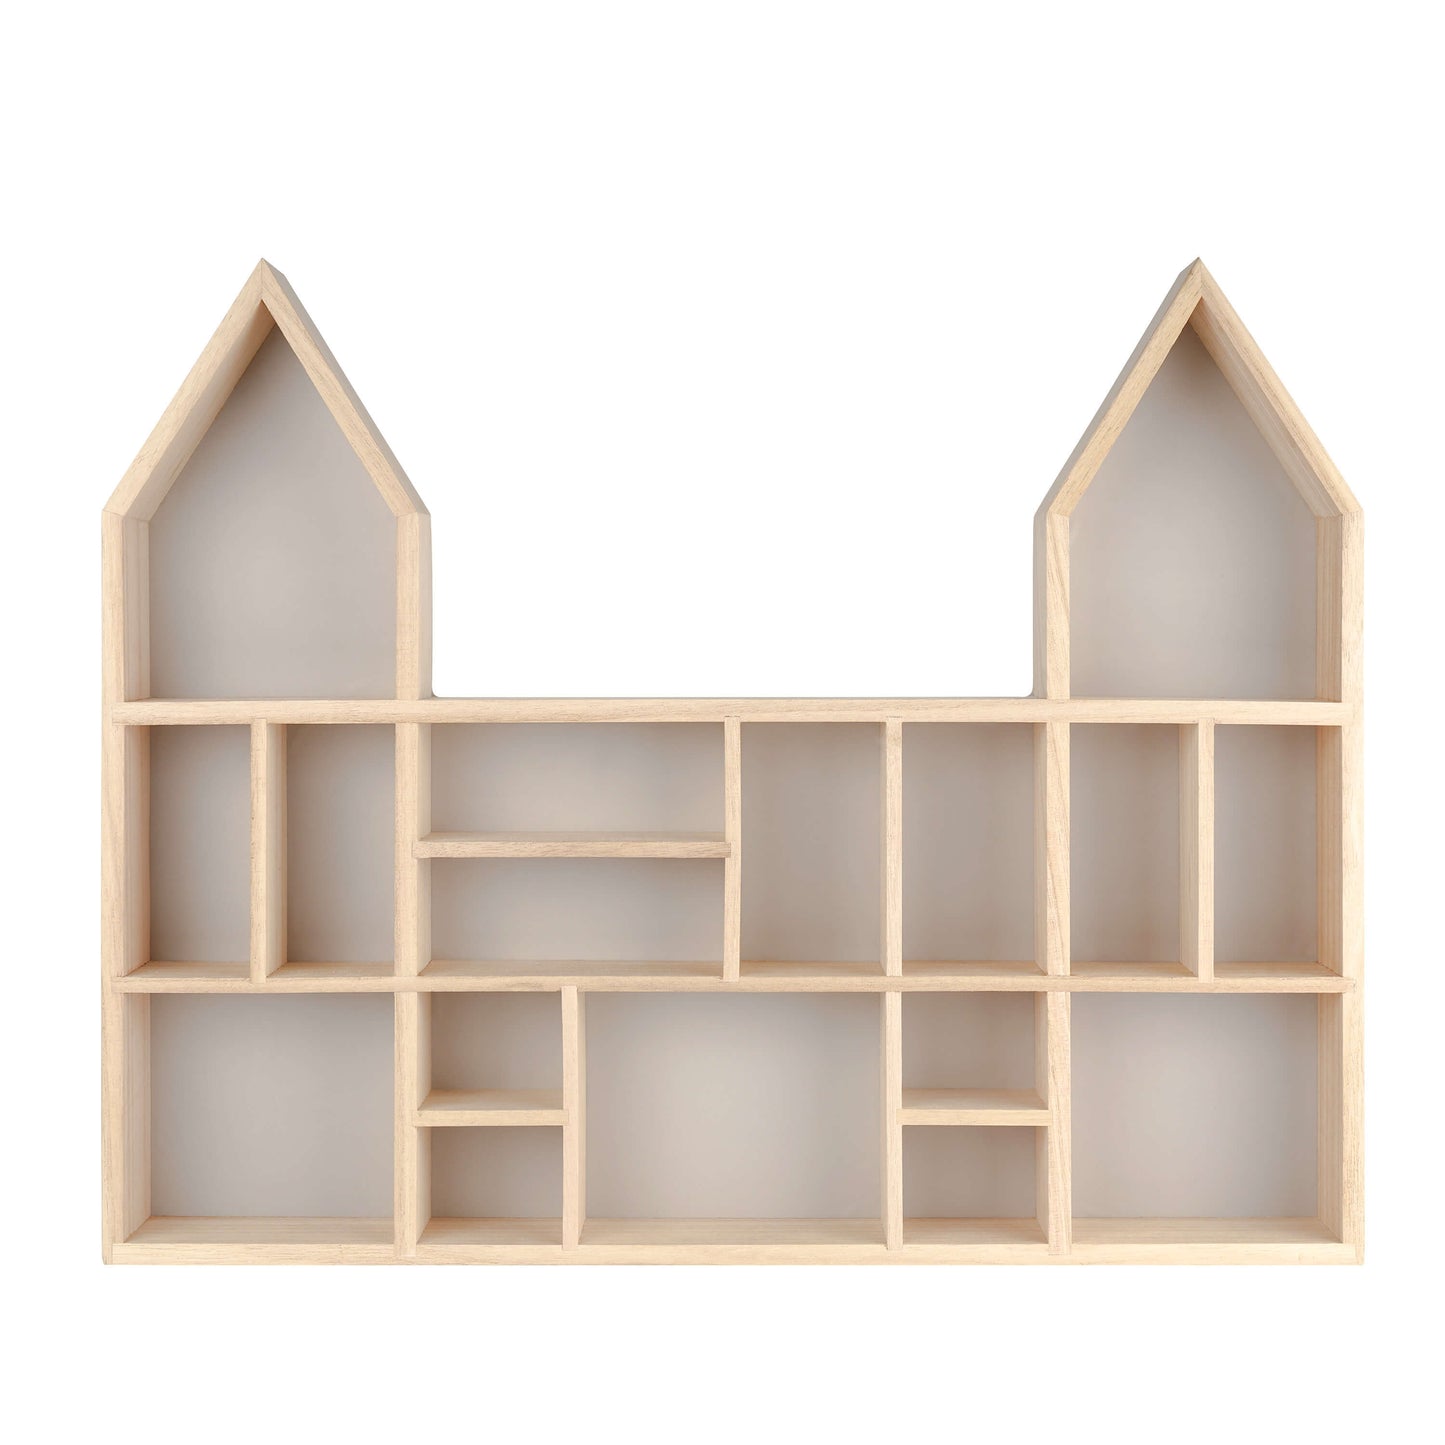 Castle shaped wooden toy display shelf with a gray-colored backboard ( Empty, front view)